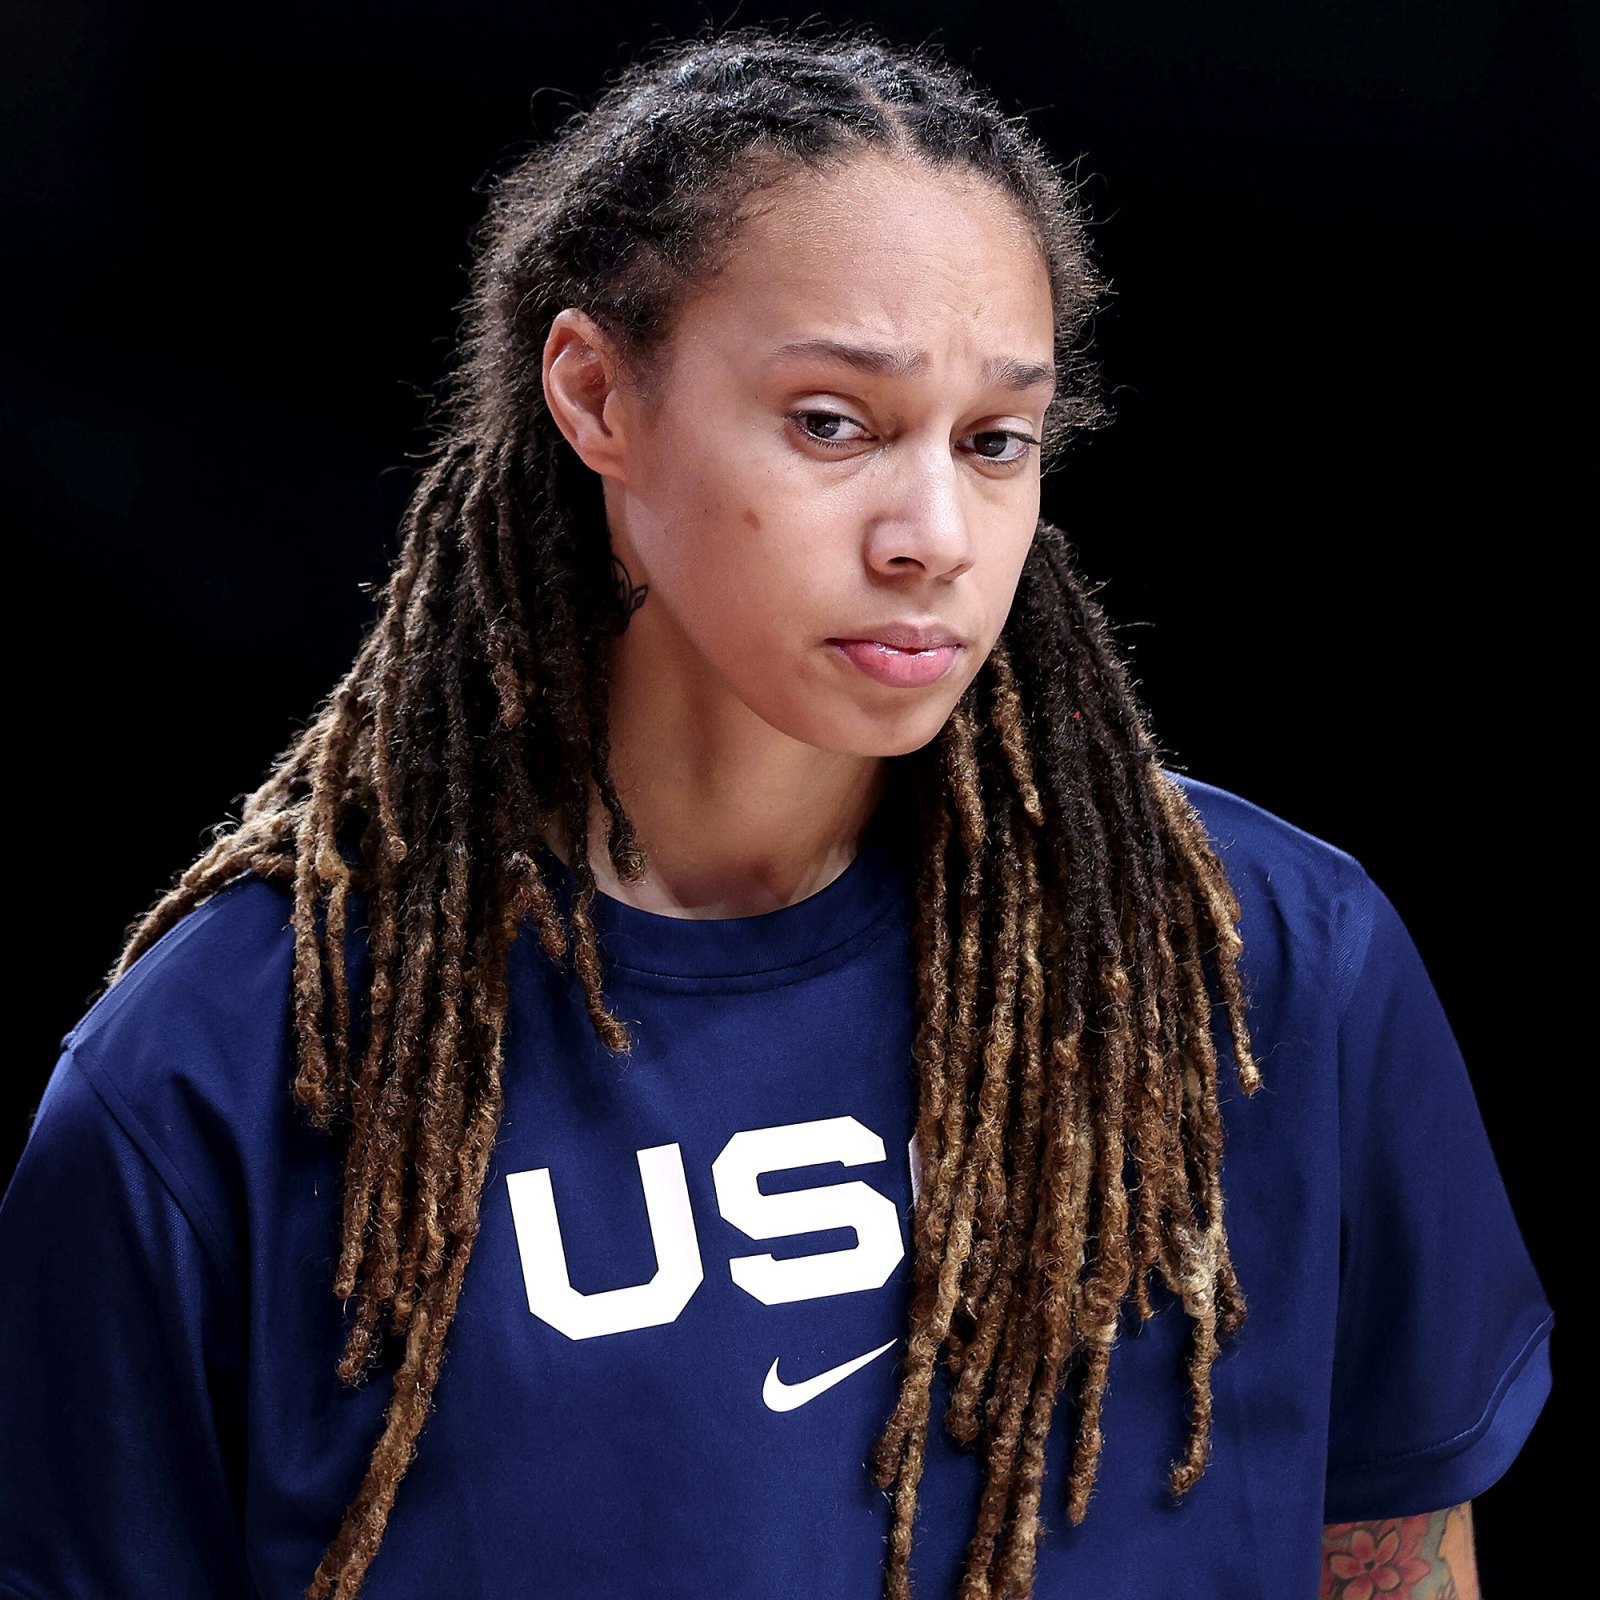 Who Is Brittney Griner? What to Know About the WNBA Star Detained in Russia